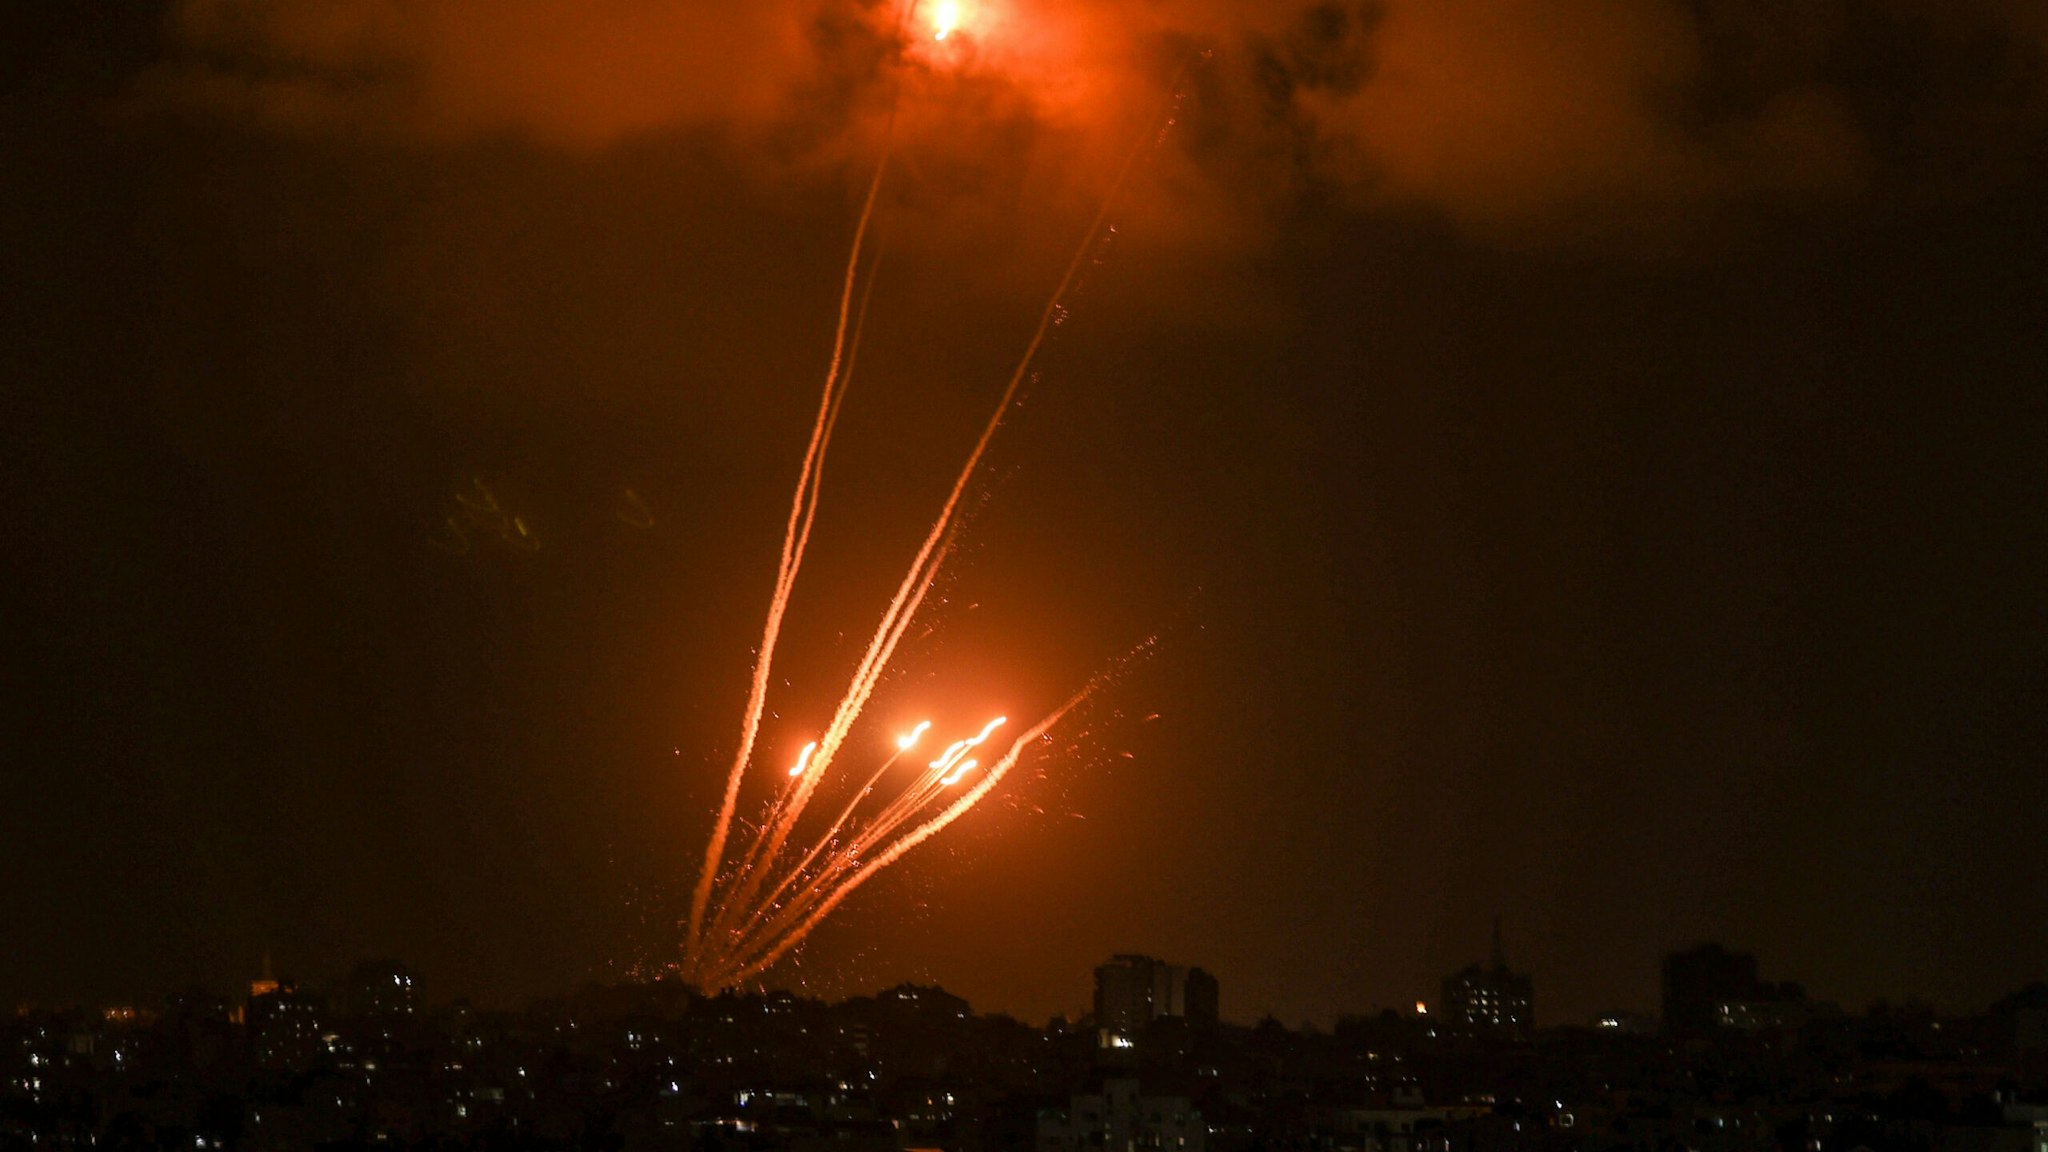 TOPSHOT - A salvo of rockets is fired from Gaza City toward Israel, on August 6, 2022. - The Israeli military warned deadly aerial operations against militants in Gaza could last a week, as exchanges of fire were ongoing for a second day in the worst escalation since last year's war. Israel has said it was forced to launch a "pre-emptive" operation against Islamic Jihad, insisting the group was planning an imminent attack following days of tensions along the border with Gaza, a Palestinian enclave.